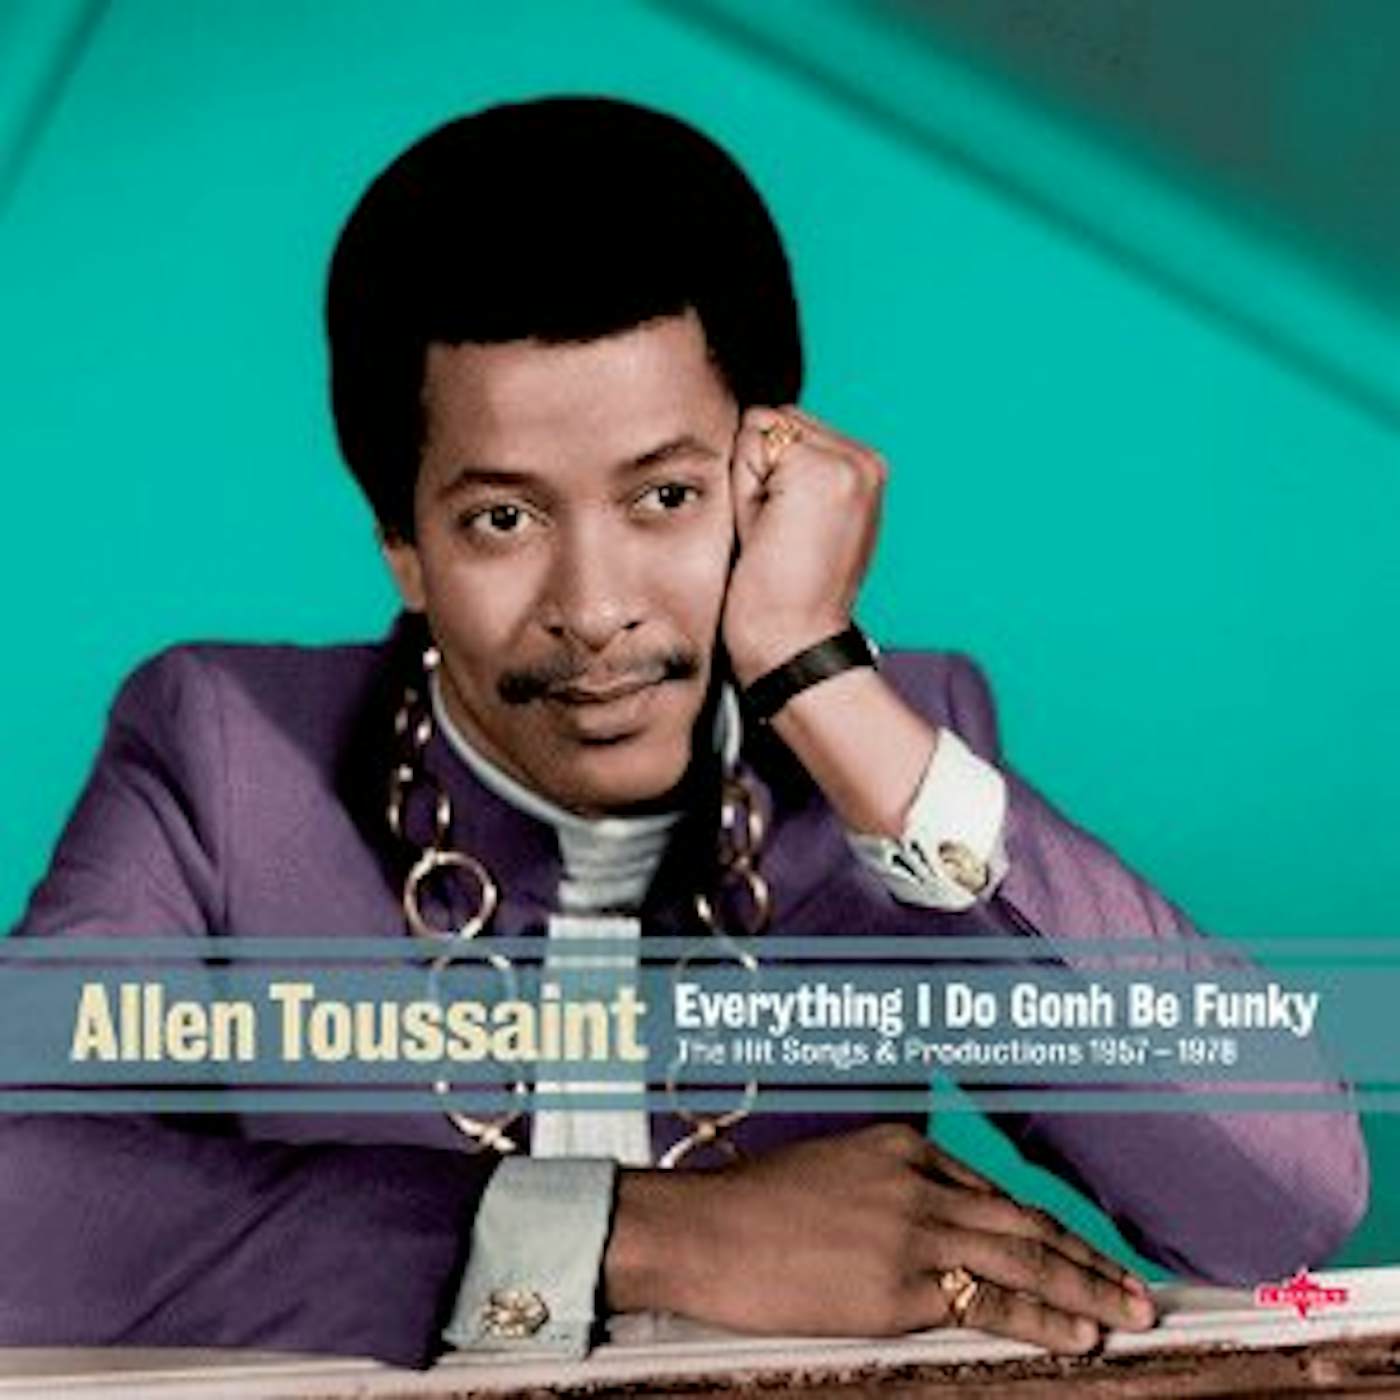 Allen Toussaint EVERYTHING I DO GONH BE FUNKY CD